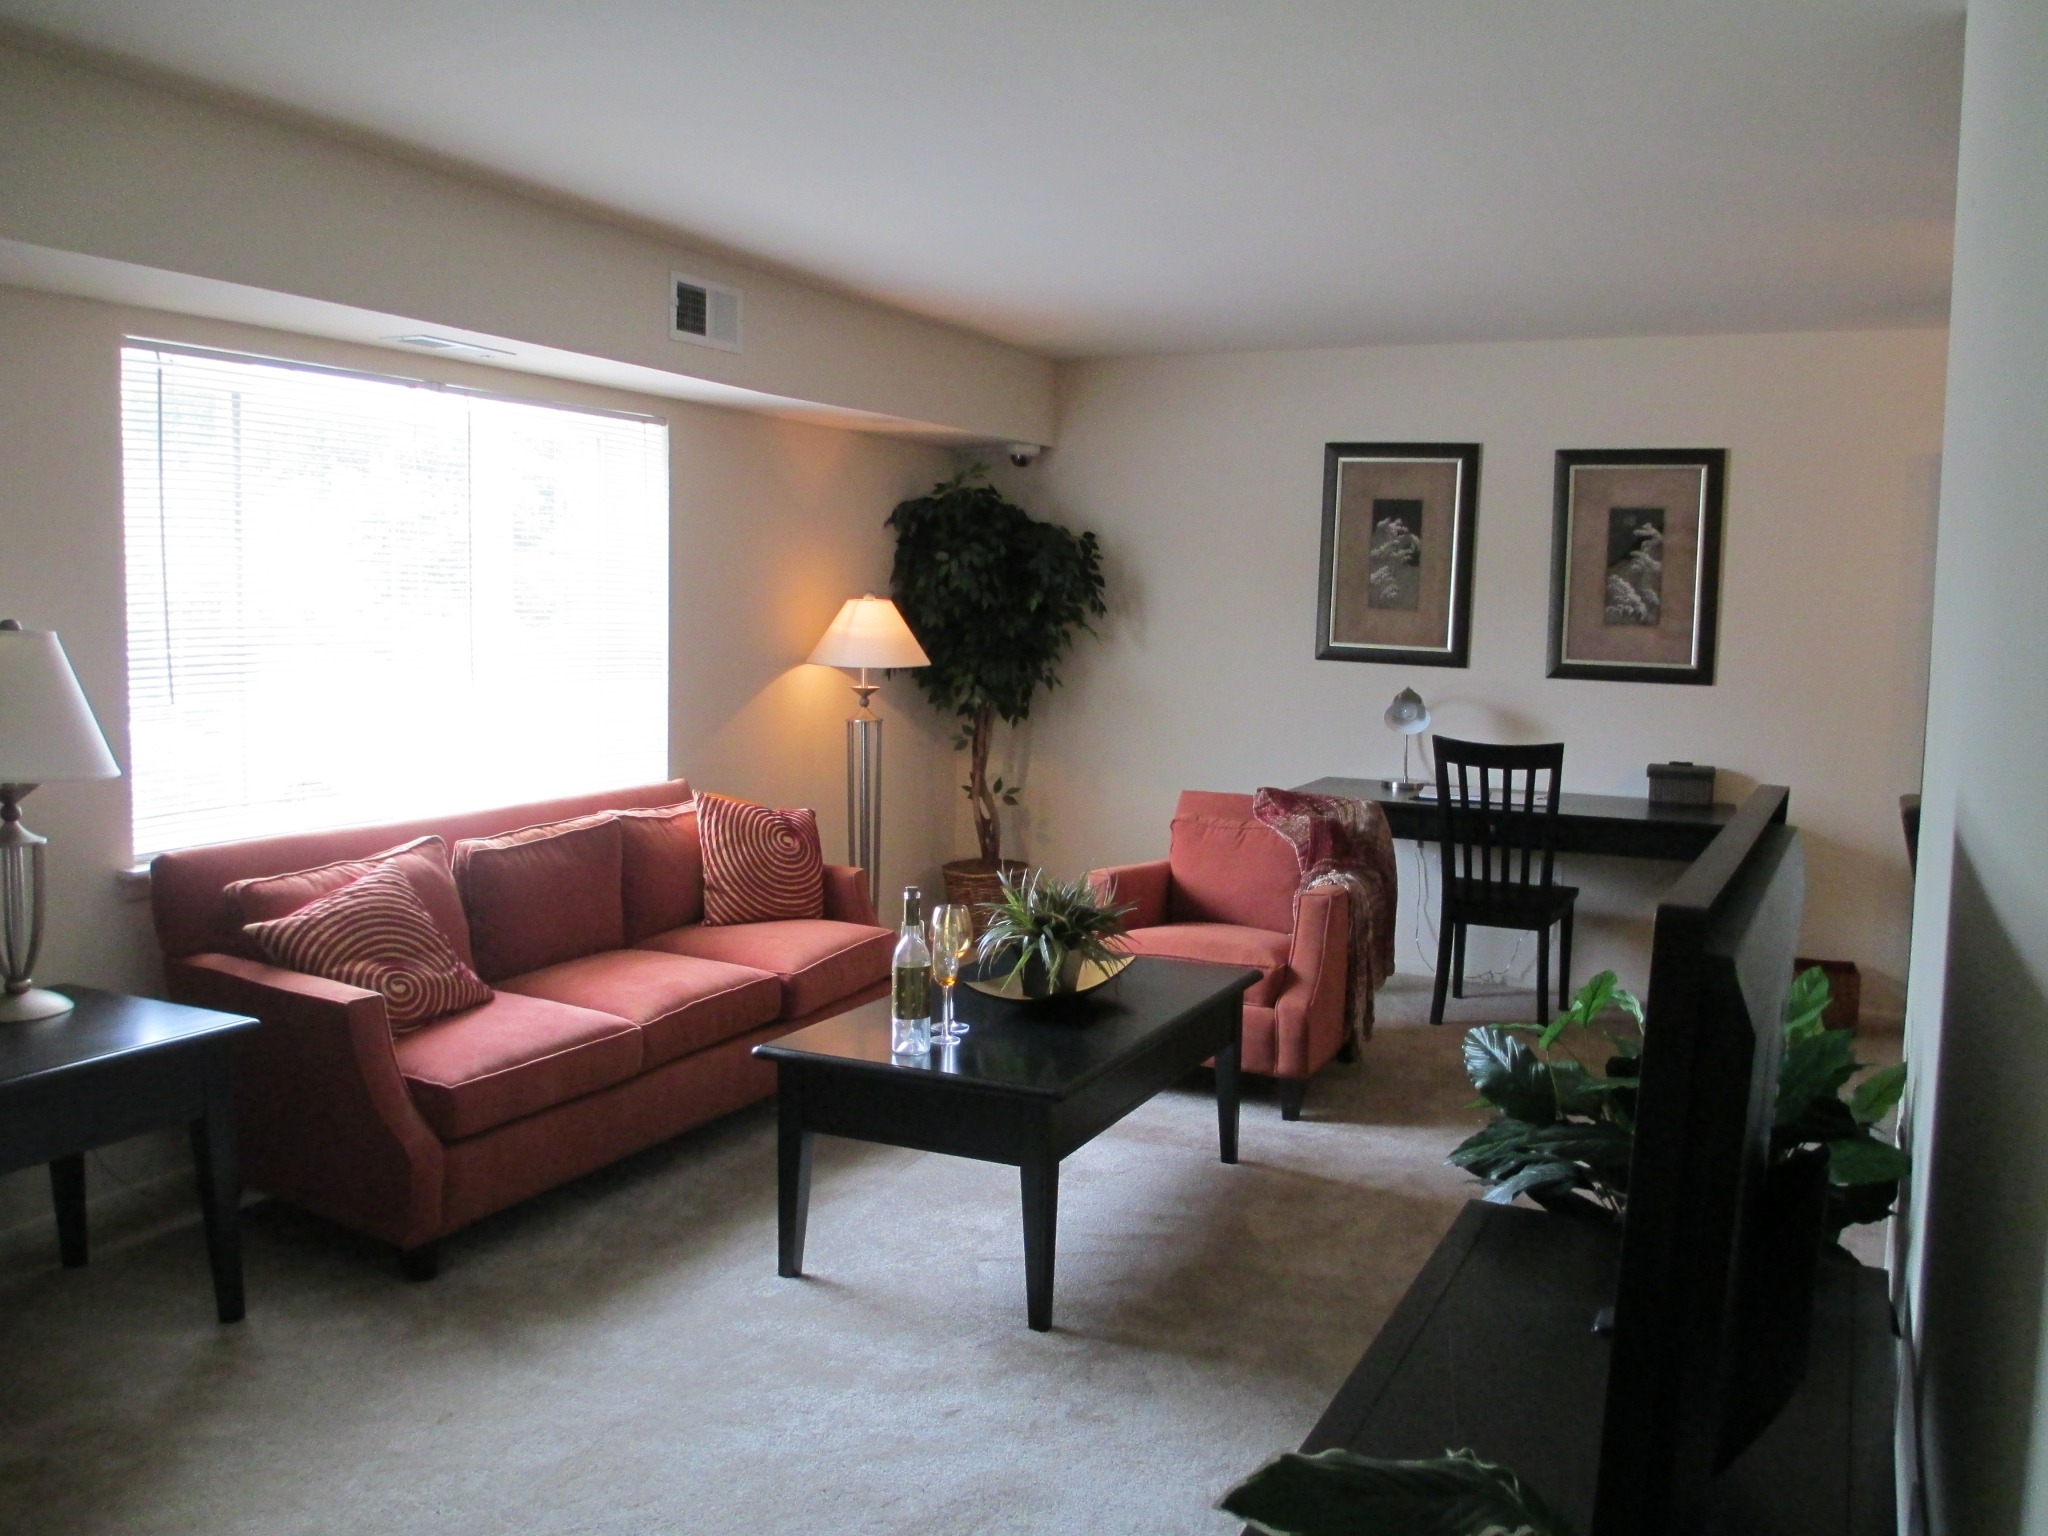 The clubhouse area of our community, fitted with carpet flooring, couches, and a high ceiling